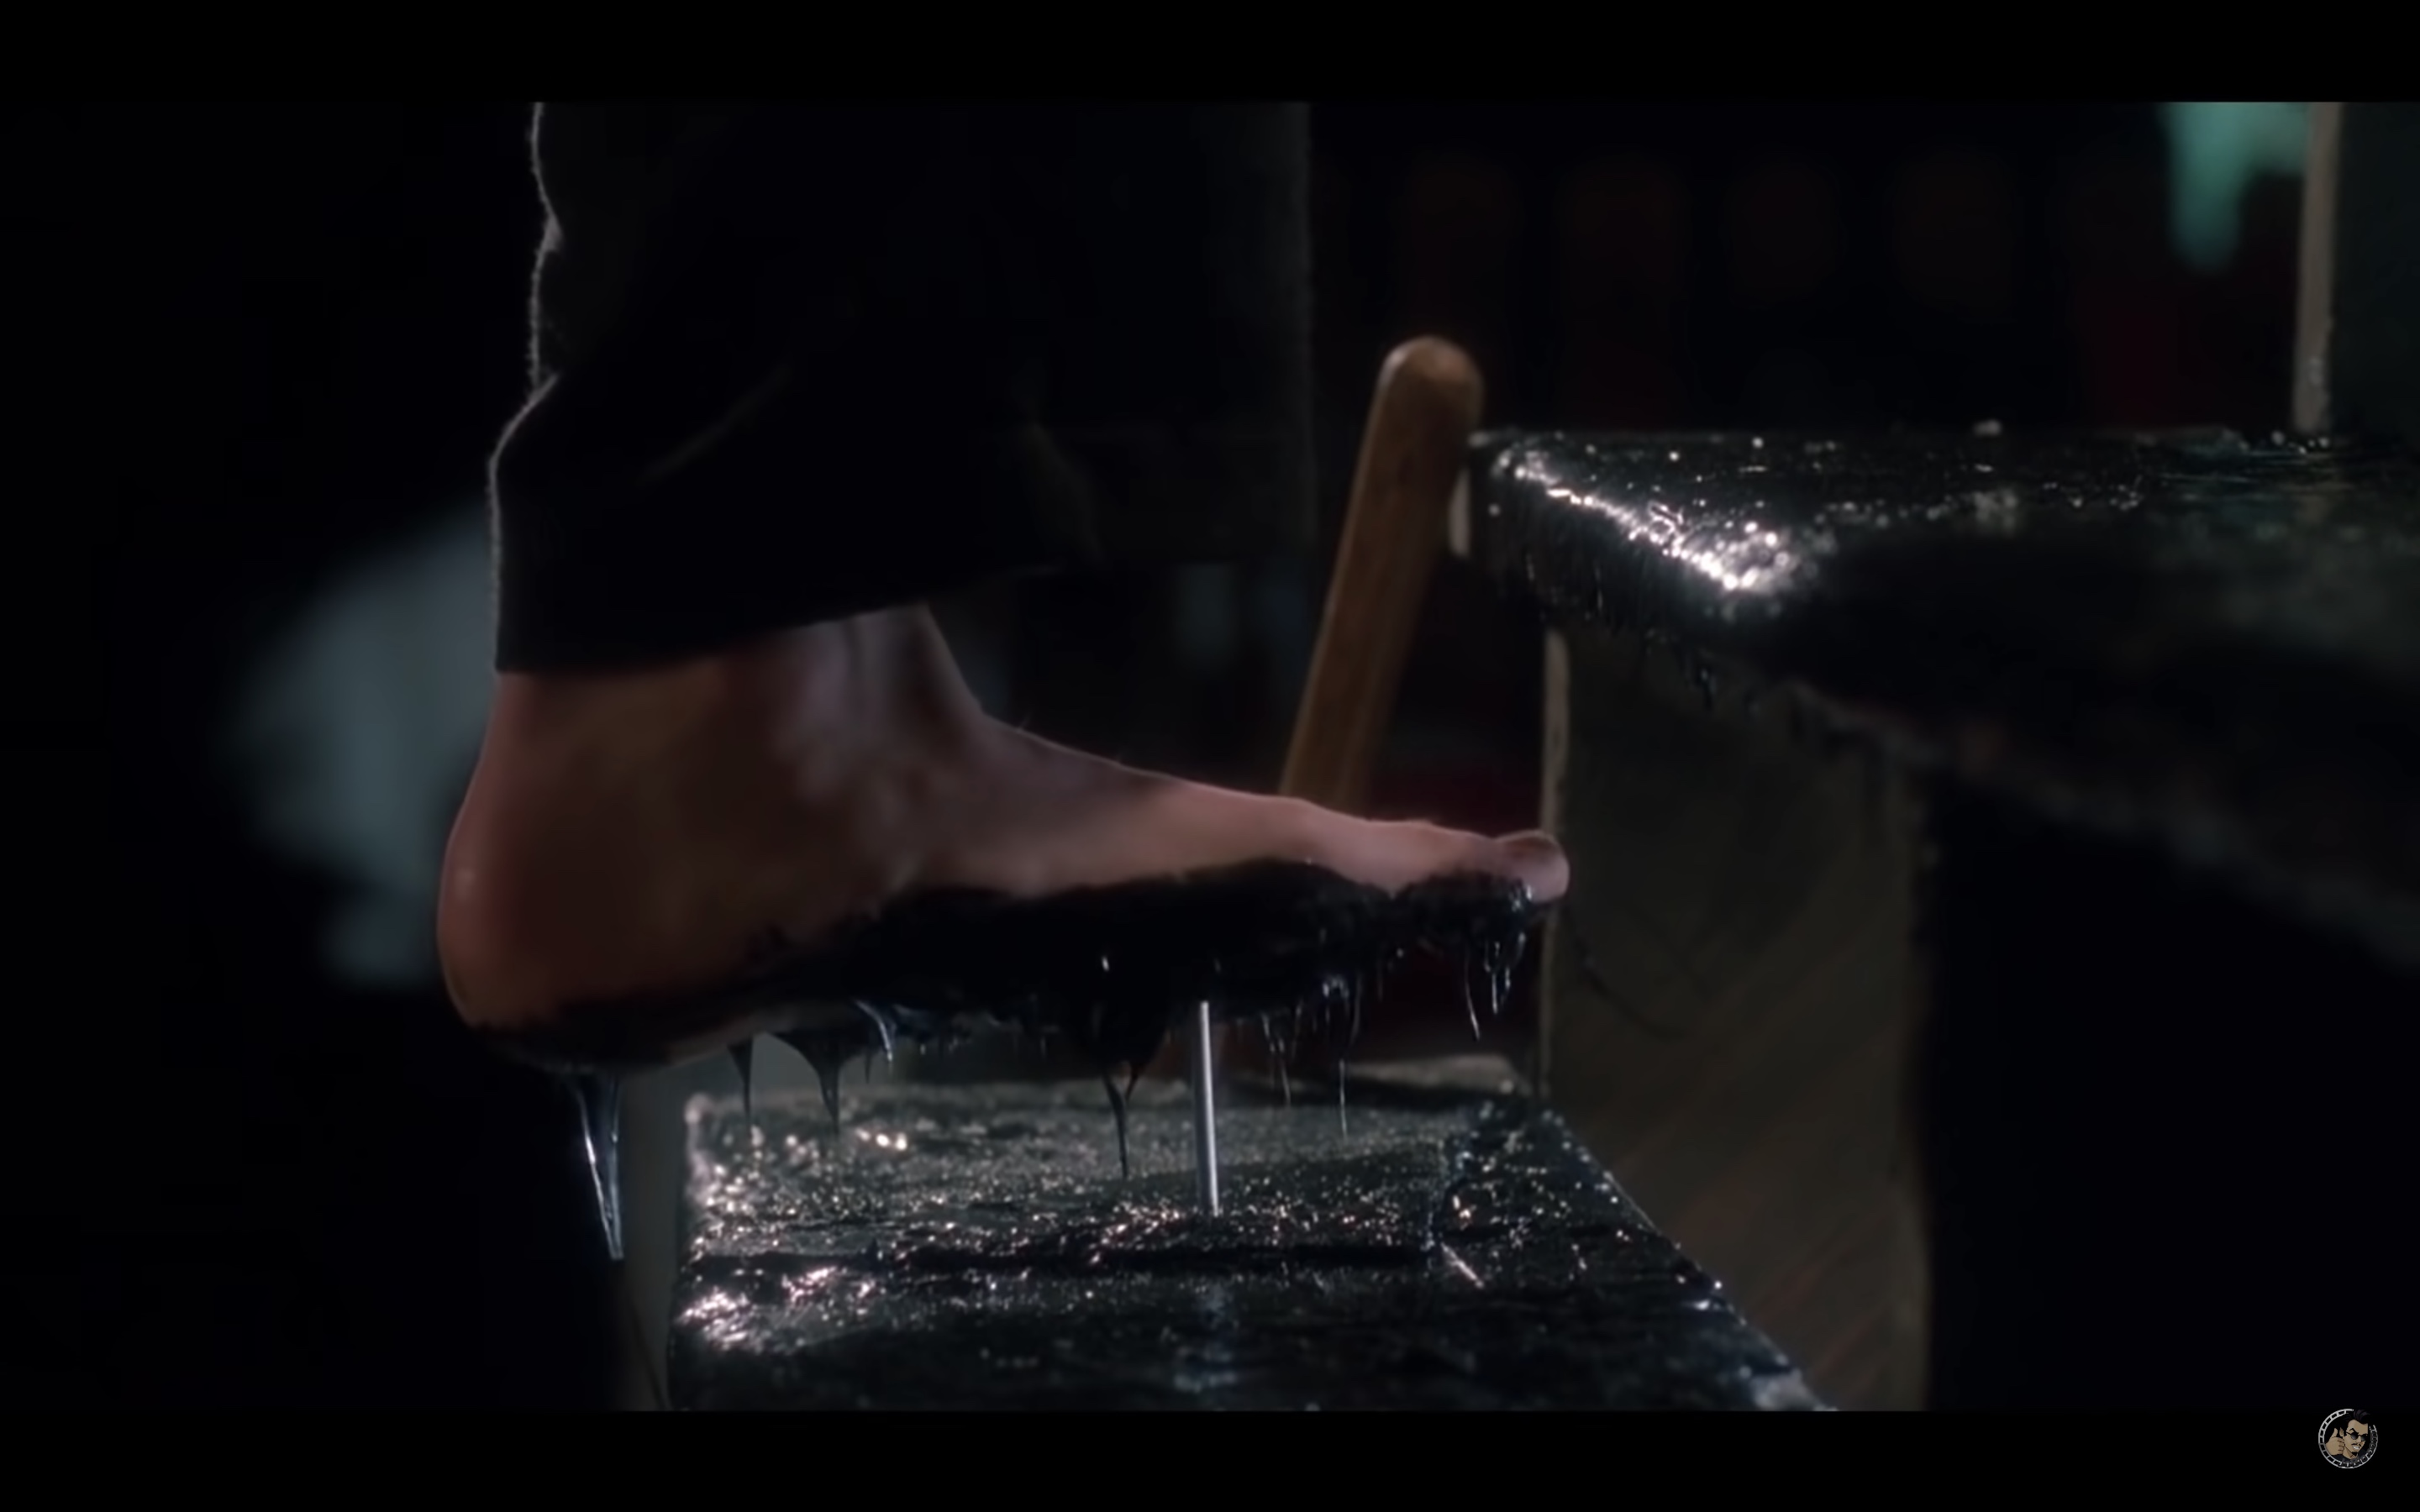 In 'Home Alone' Marv, played by Daniel Stern, steps on a nail, seen here.